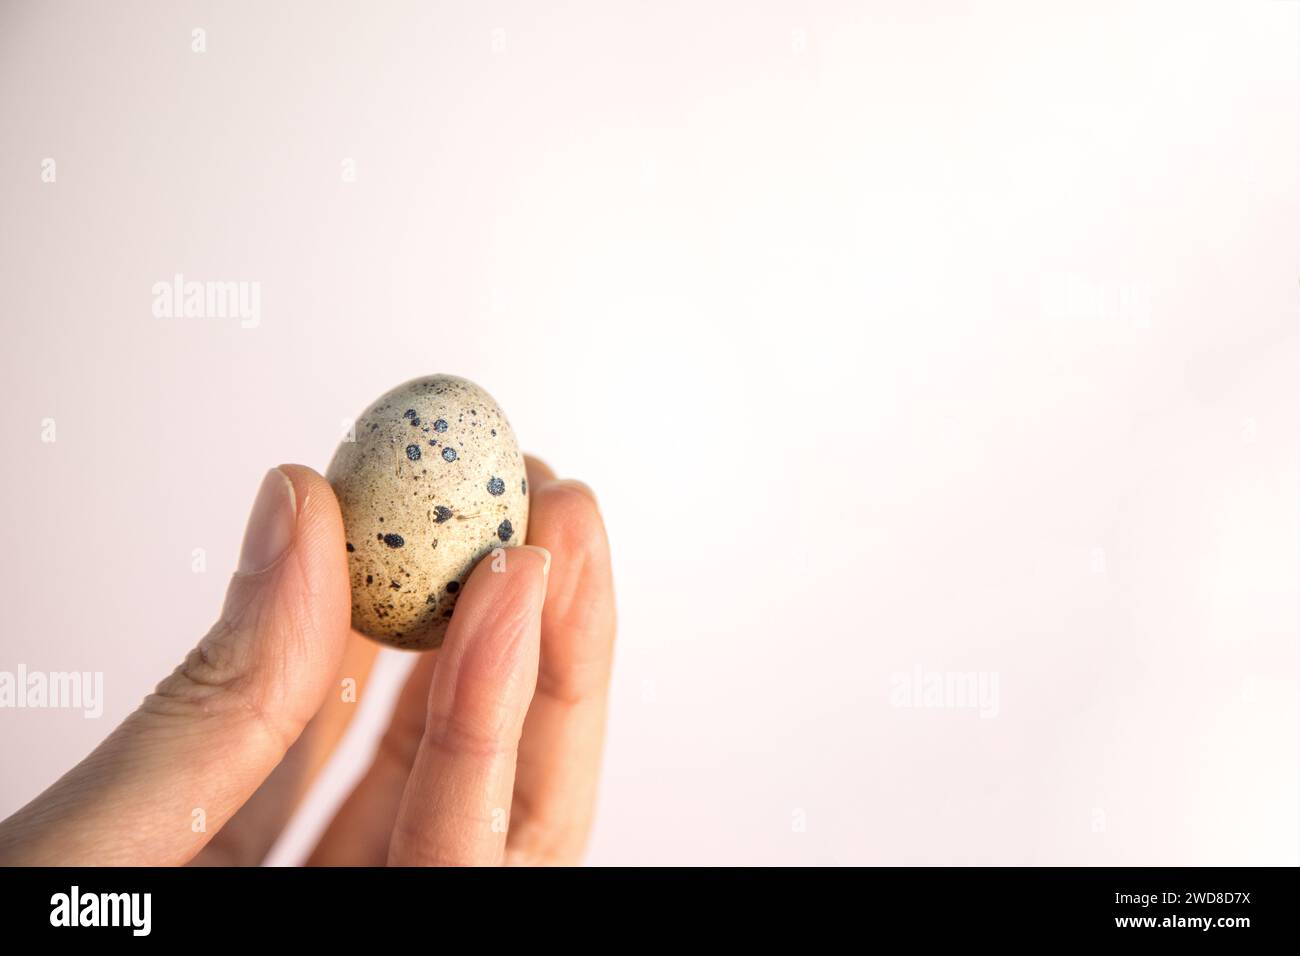 Closeup of person's hand holding a small quail egg isolated on white background. Fragility and protection concept. Copy space. Stock Photo